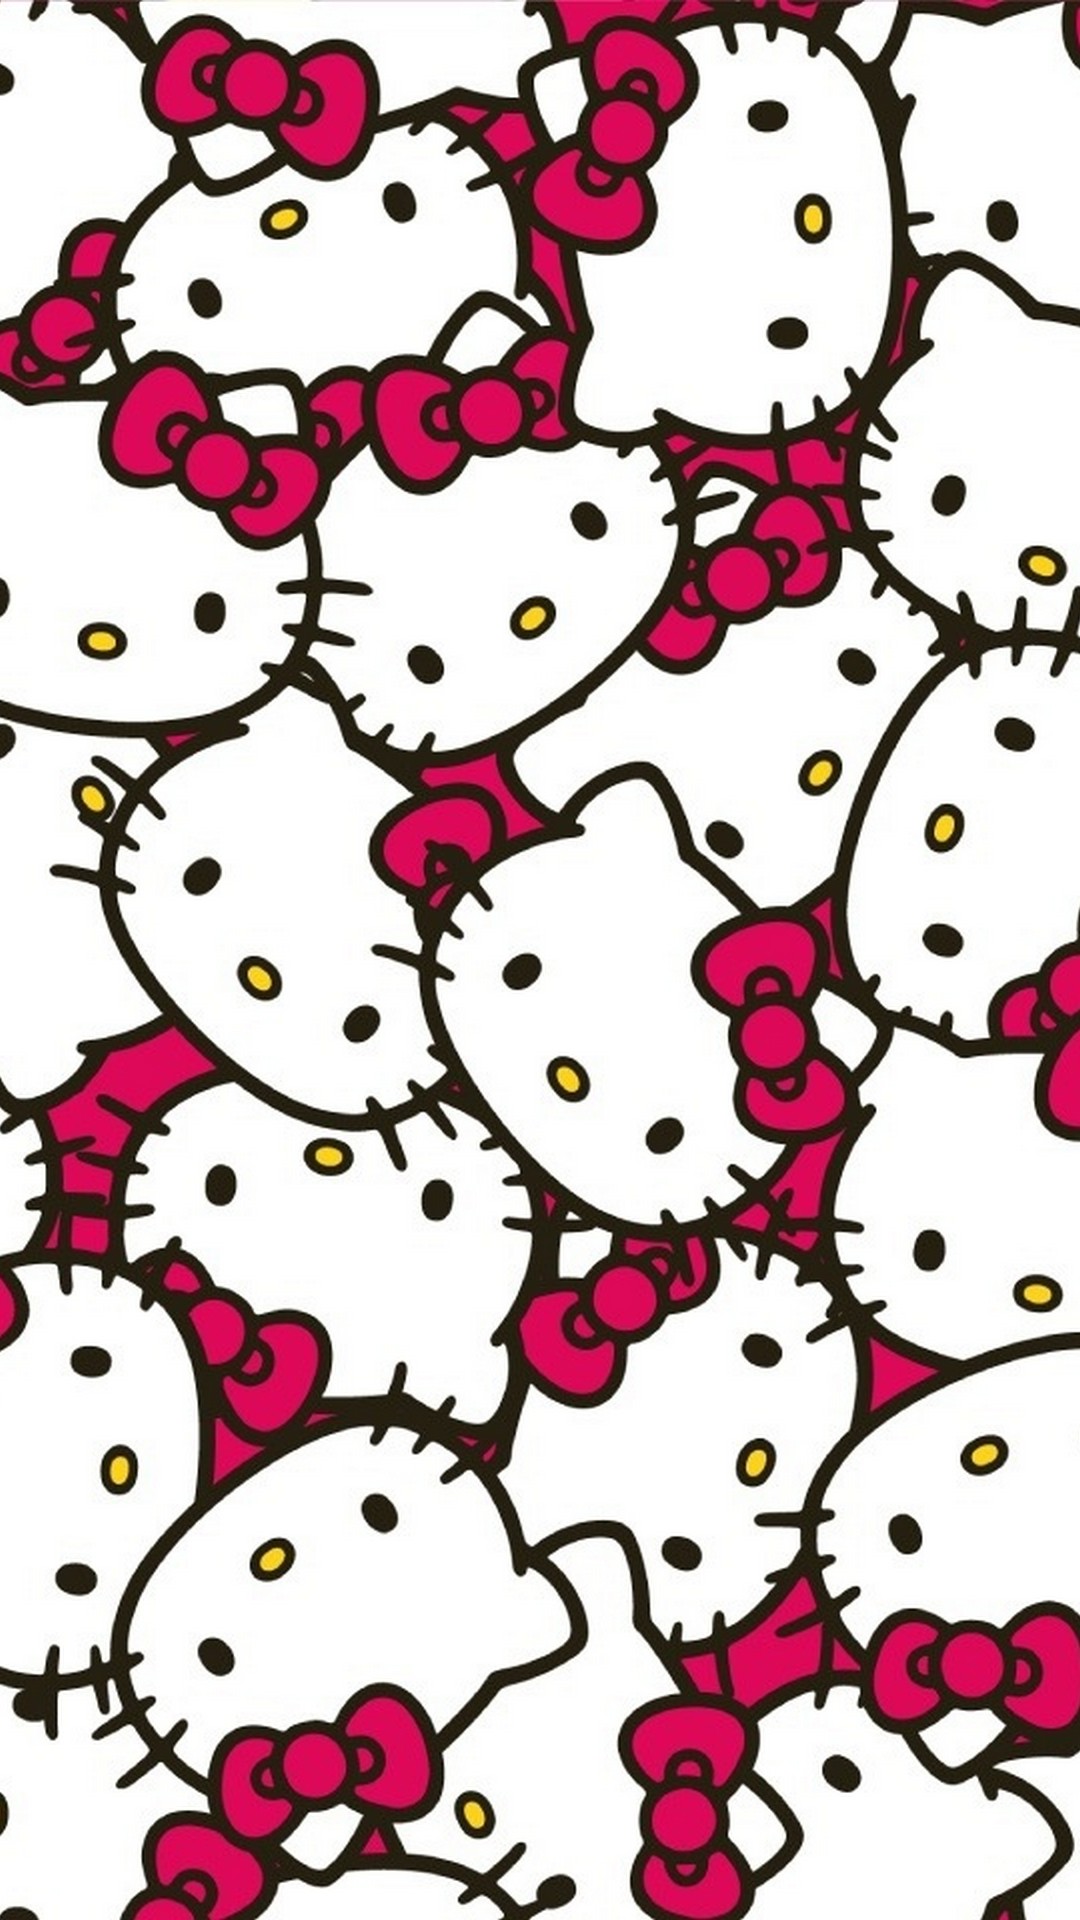 Hello Kitty Images Wallpaper iPhone with resolution 1080X1920 pixel. You can make this wallpaper for your iPhone 5, 6, 7, 8, X backgrounds, Mobile Screensaver, or iPad Lock Screen